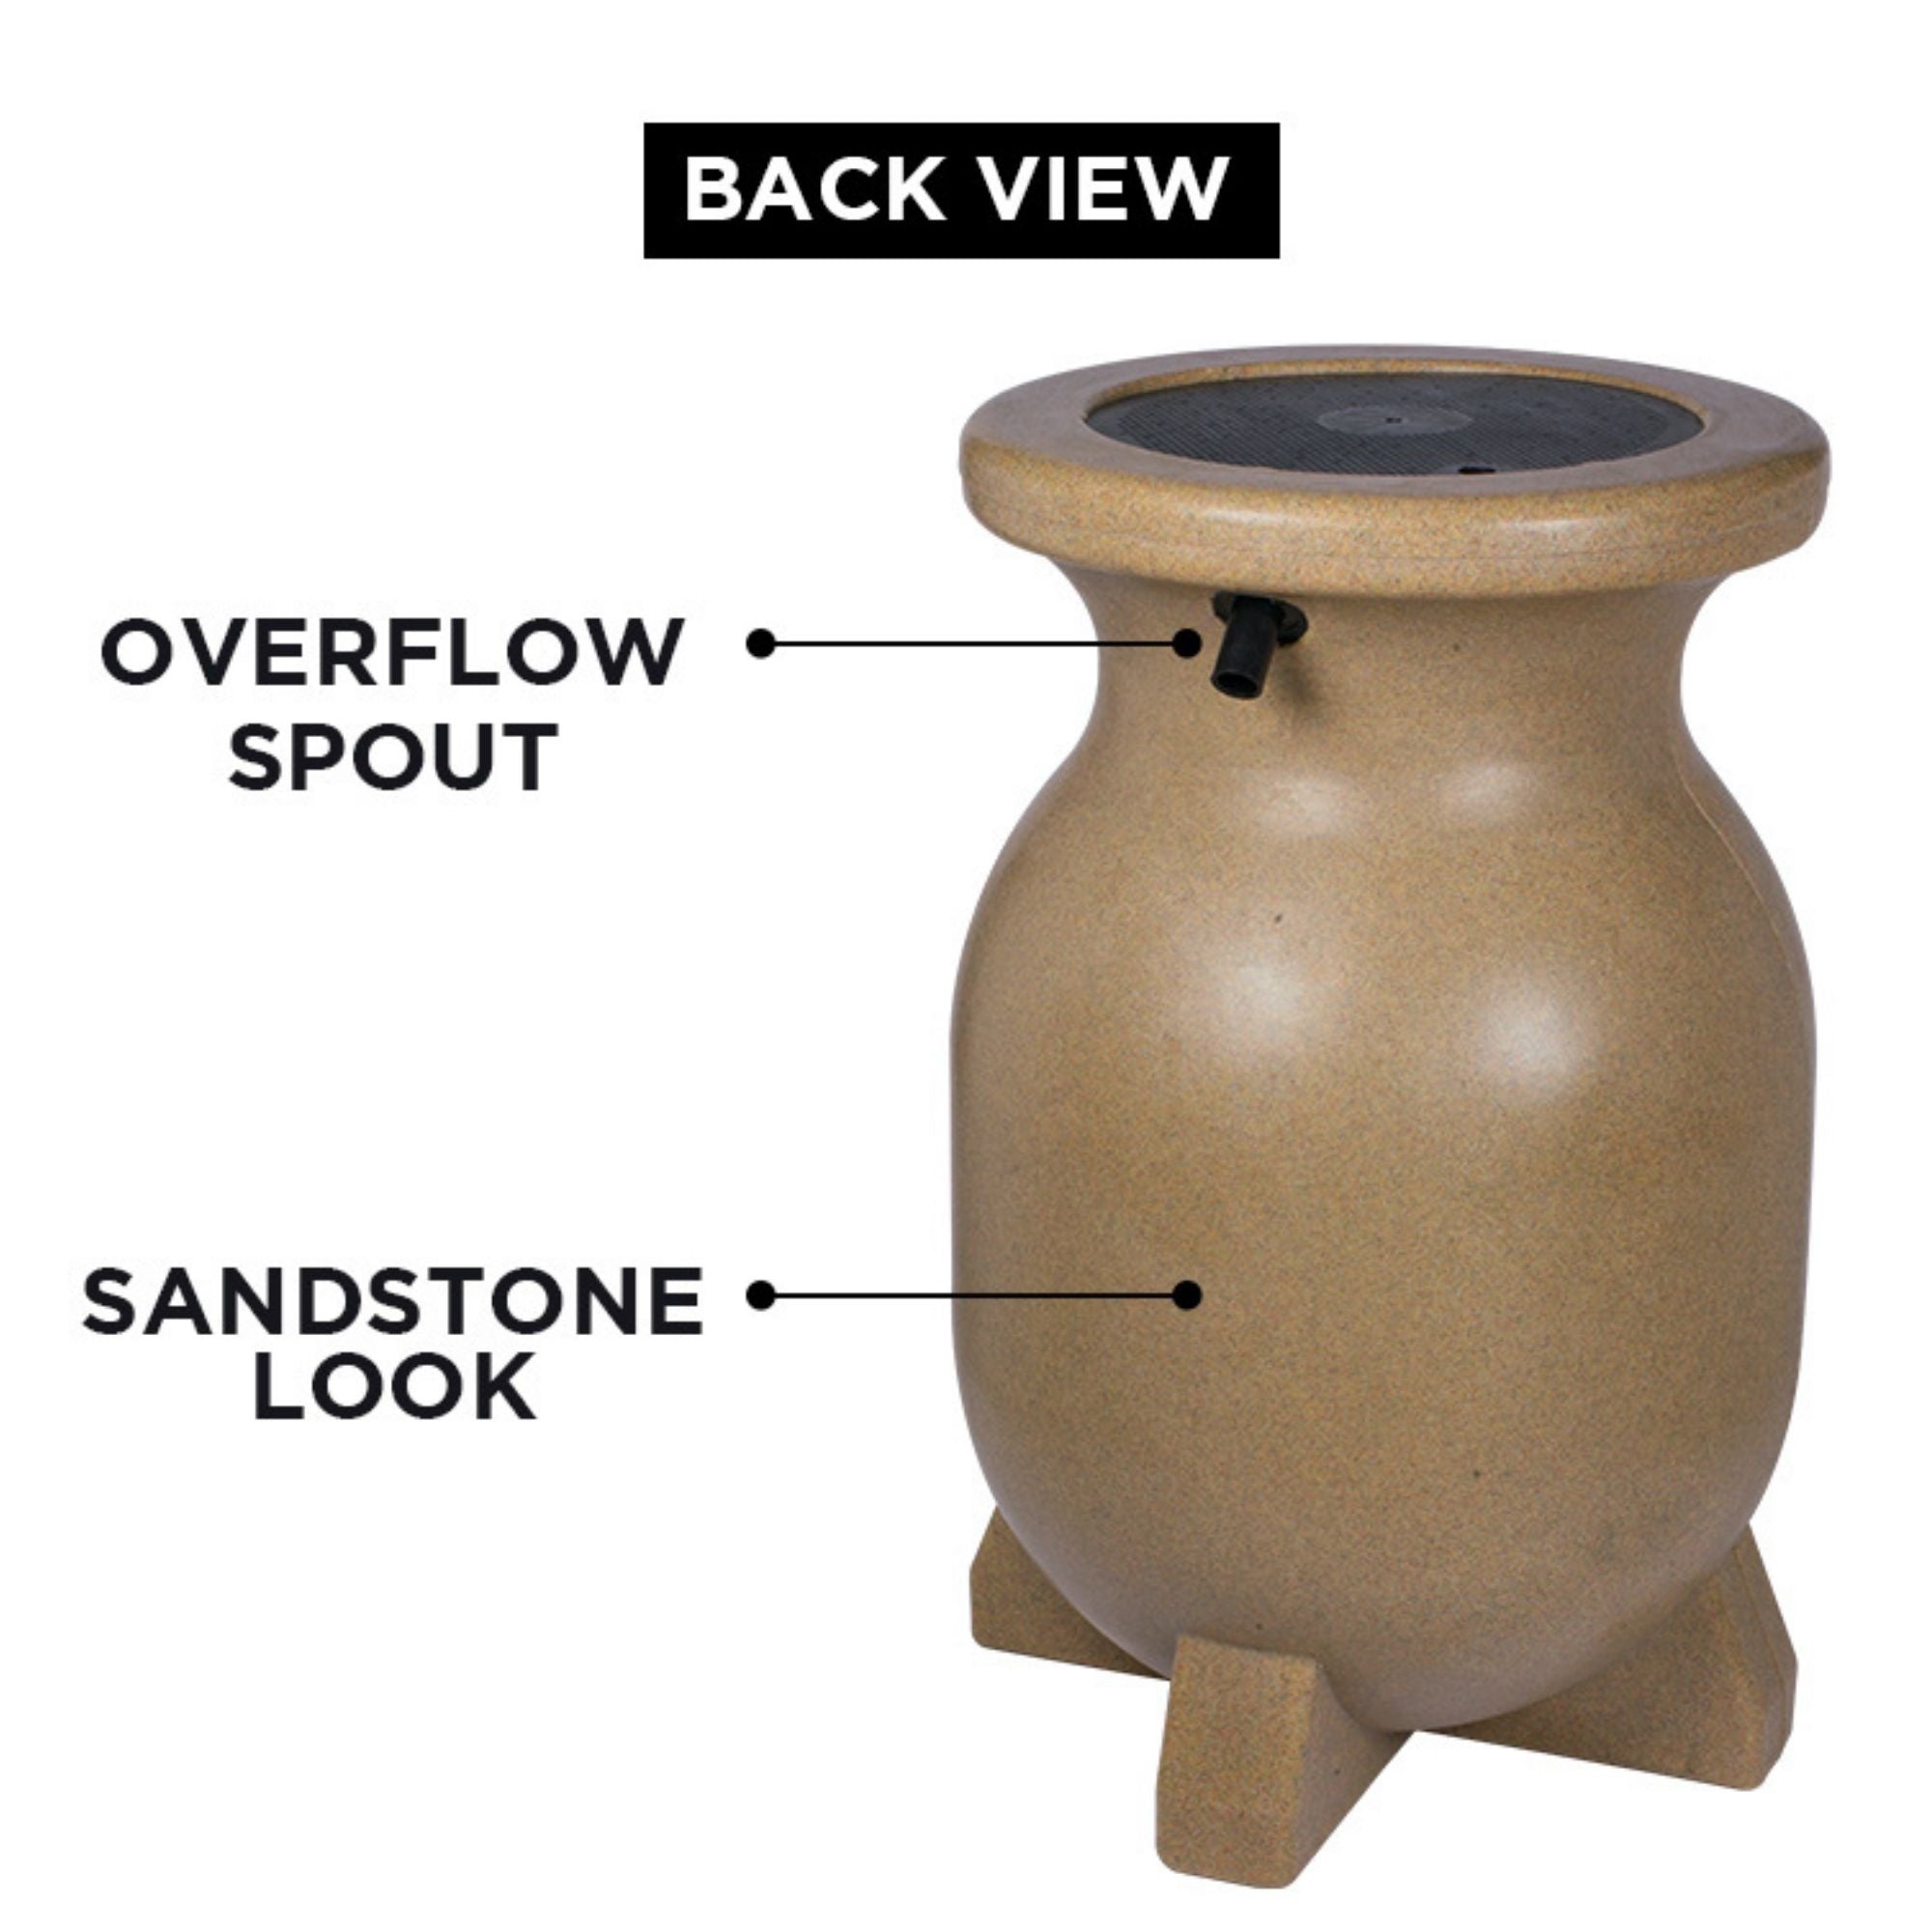 Back view product shot of stone-look beige rain barrel on a white background with parts labeled: Overflow spout; sandstone look